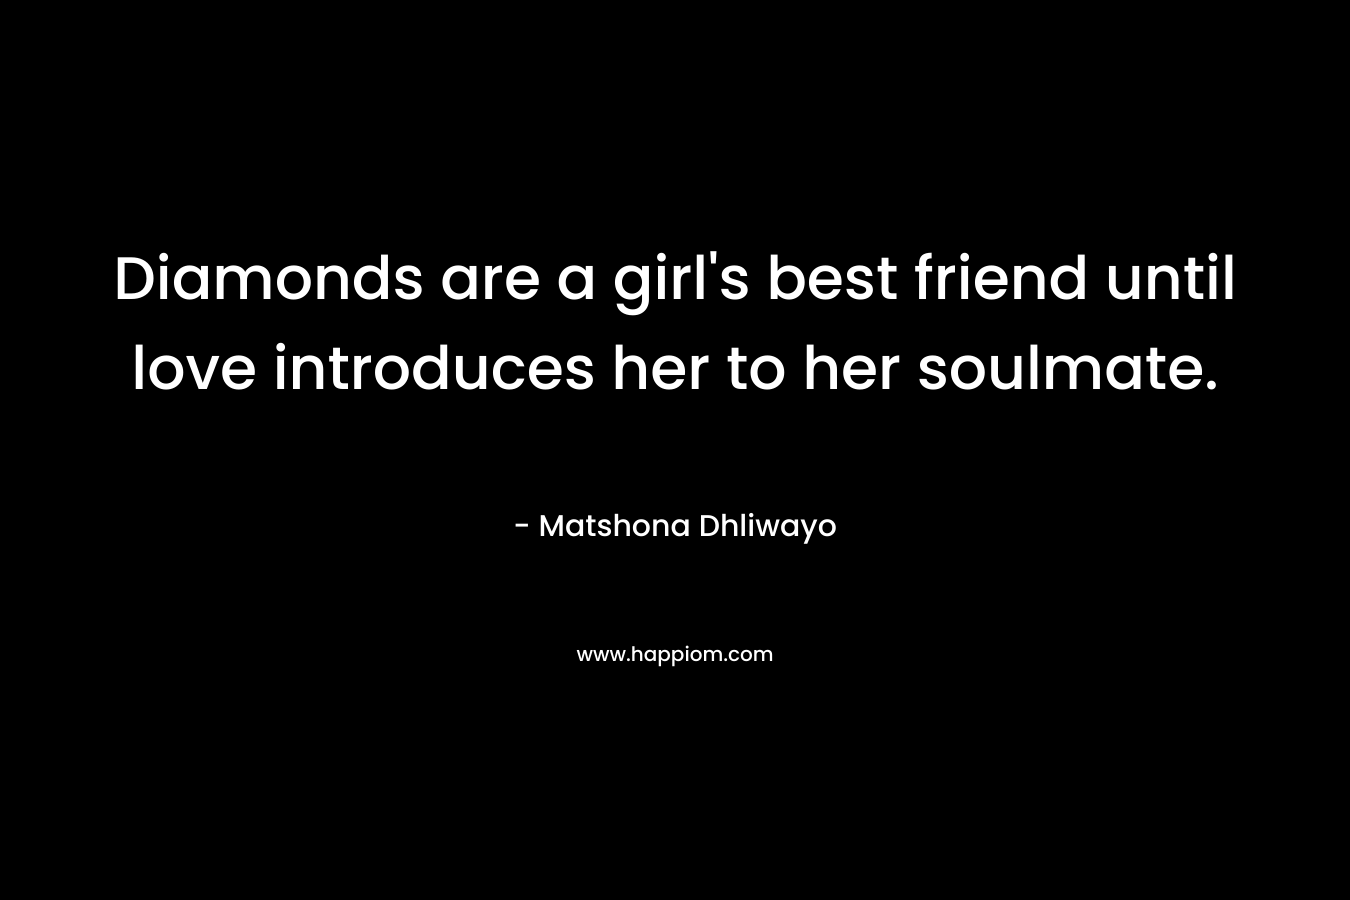 Diamonds are a girl’s best friend until love introduces her to her soulmate. – Matshona Dhliwayo